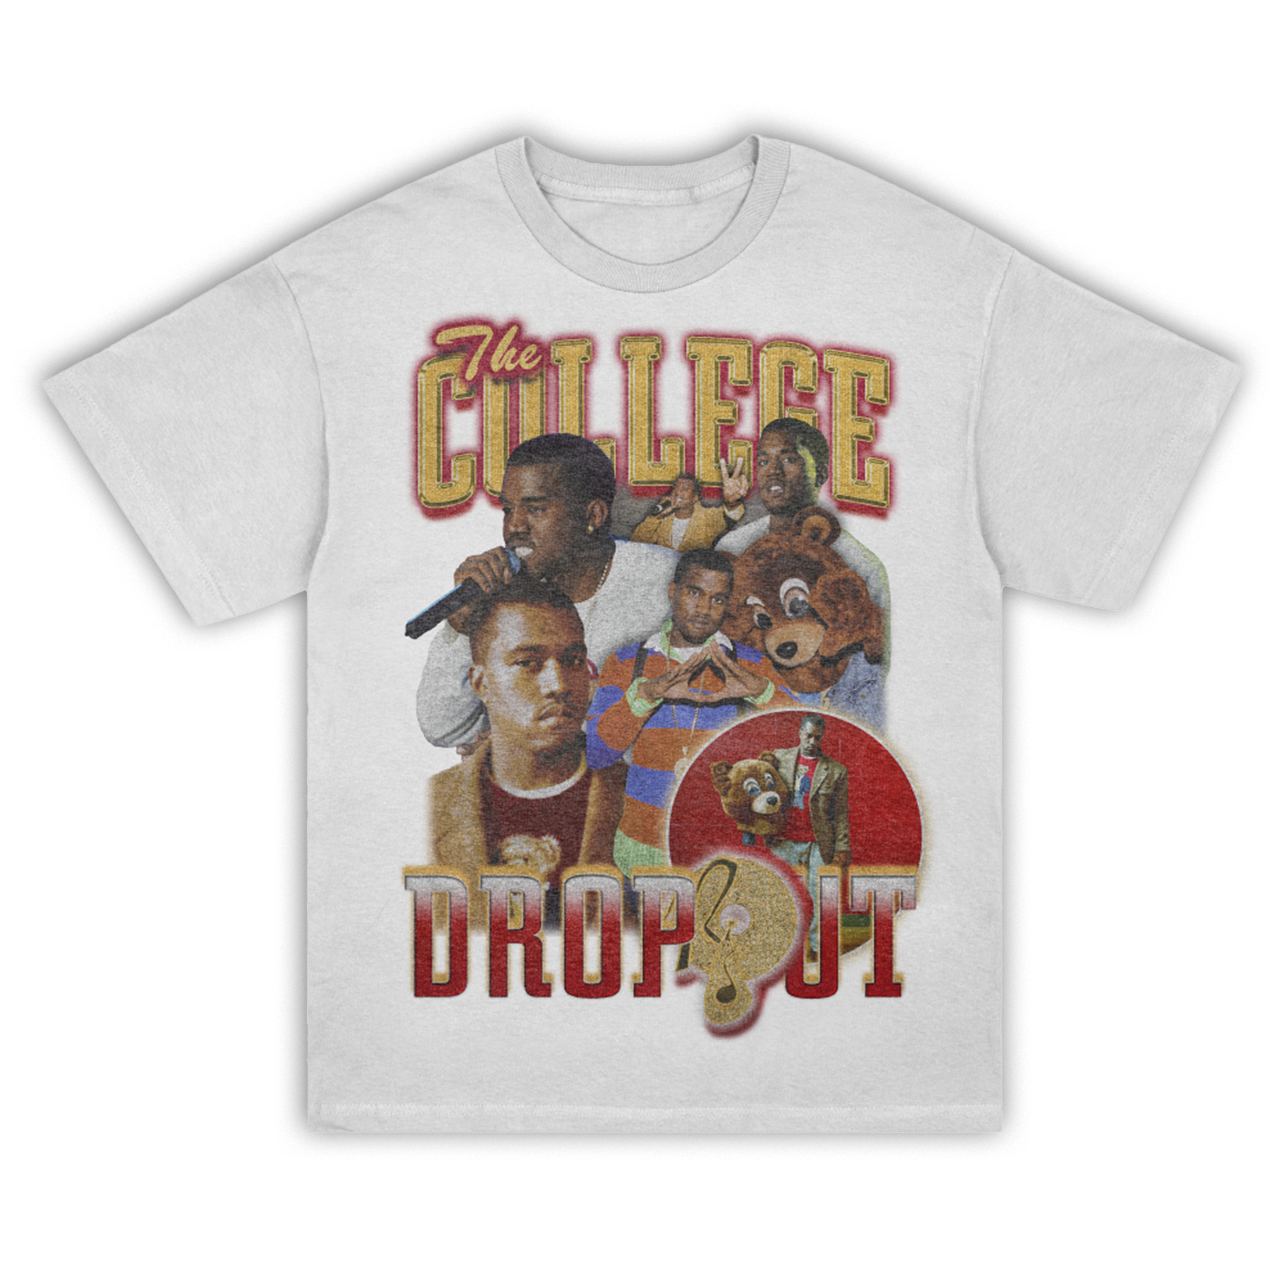 "COLLEGE DROPOUT" THROWBACK TEE